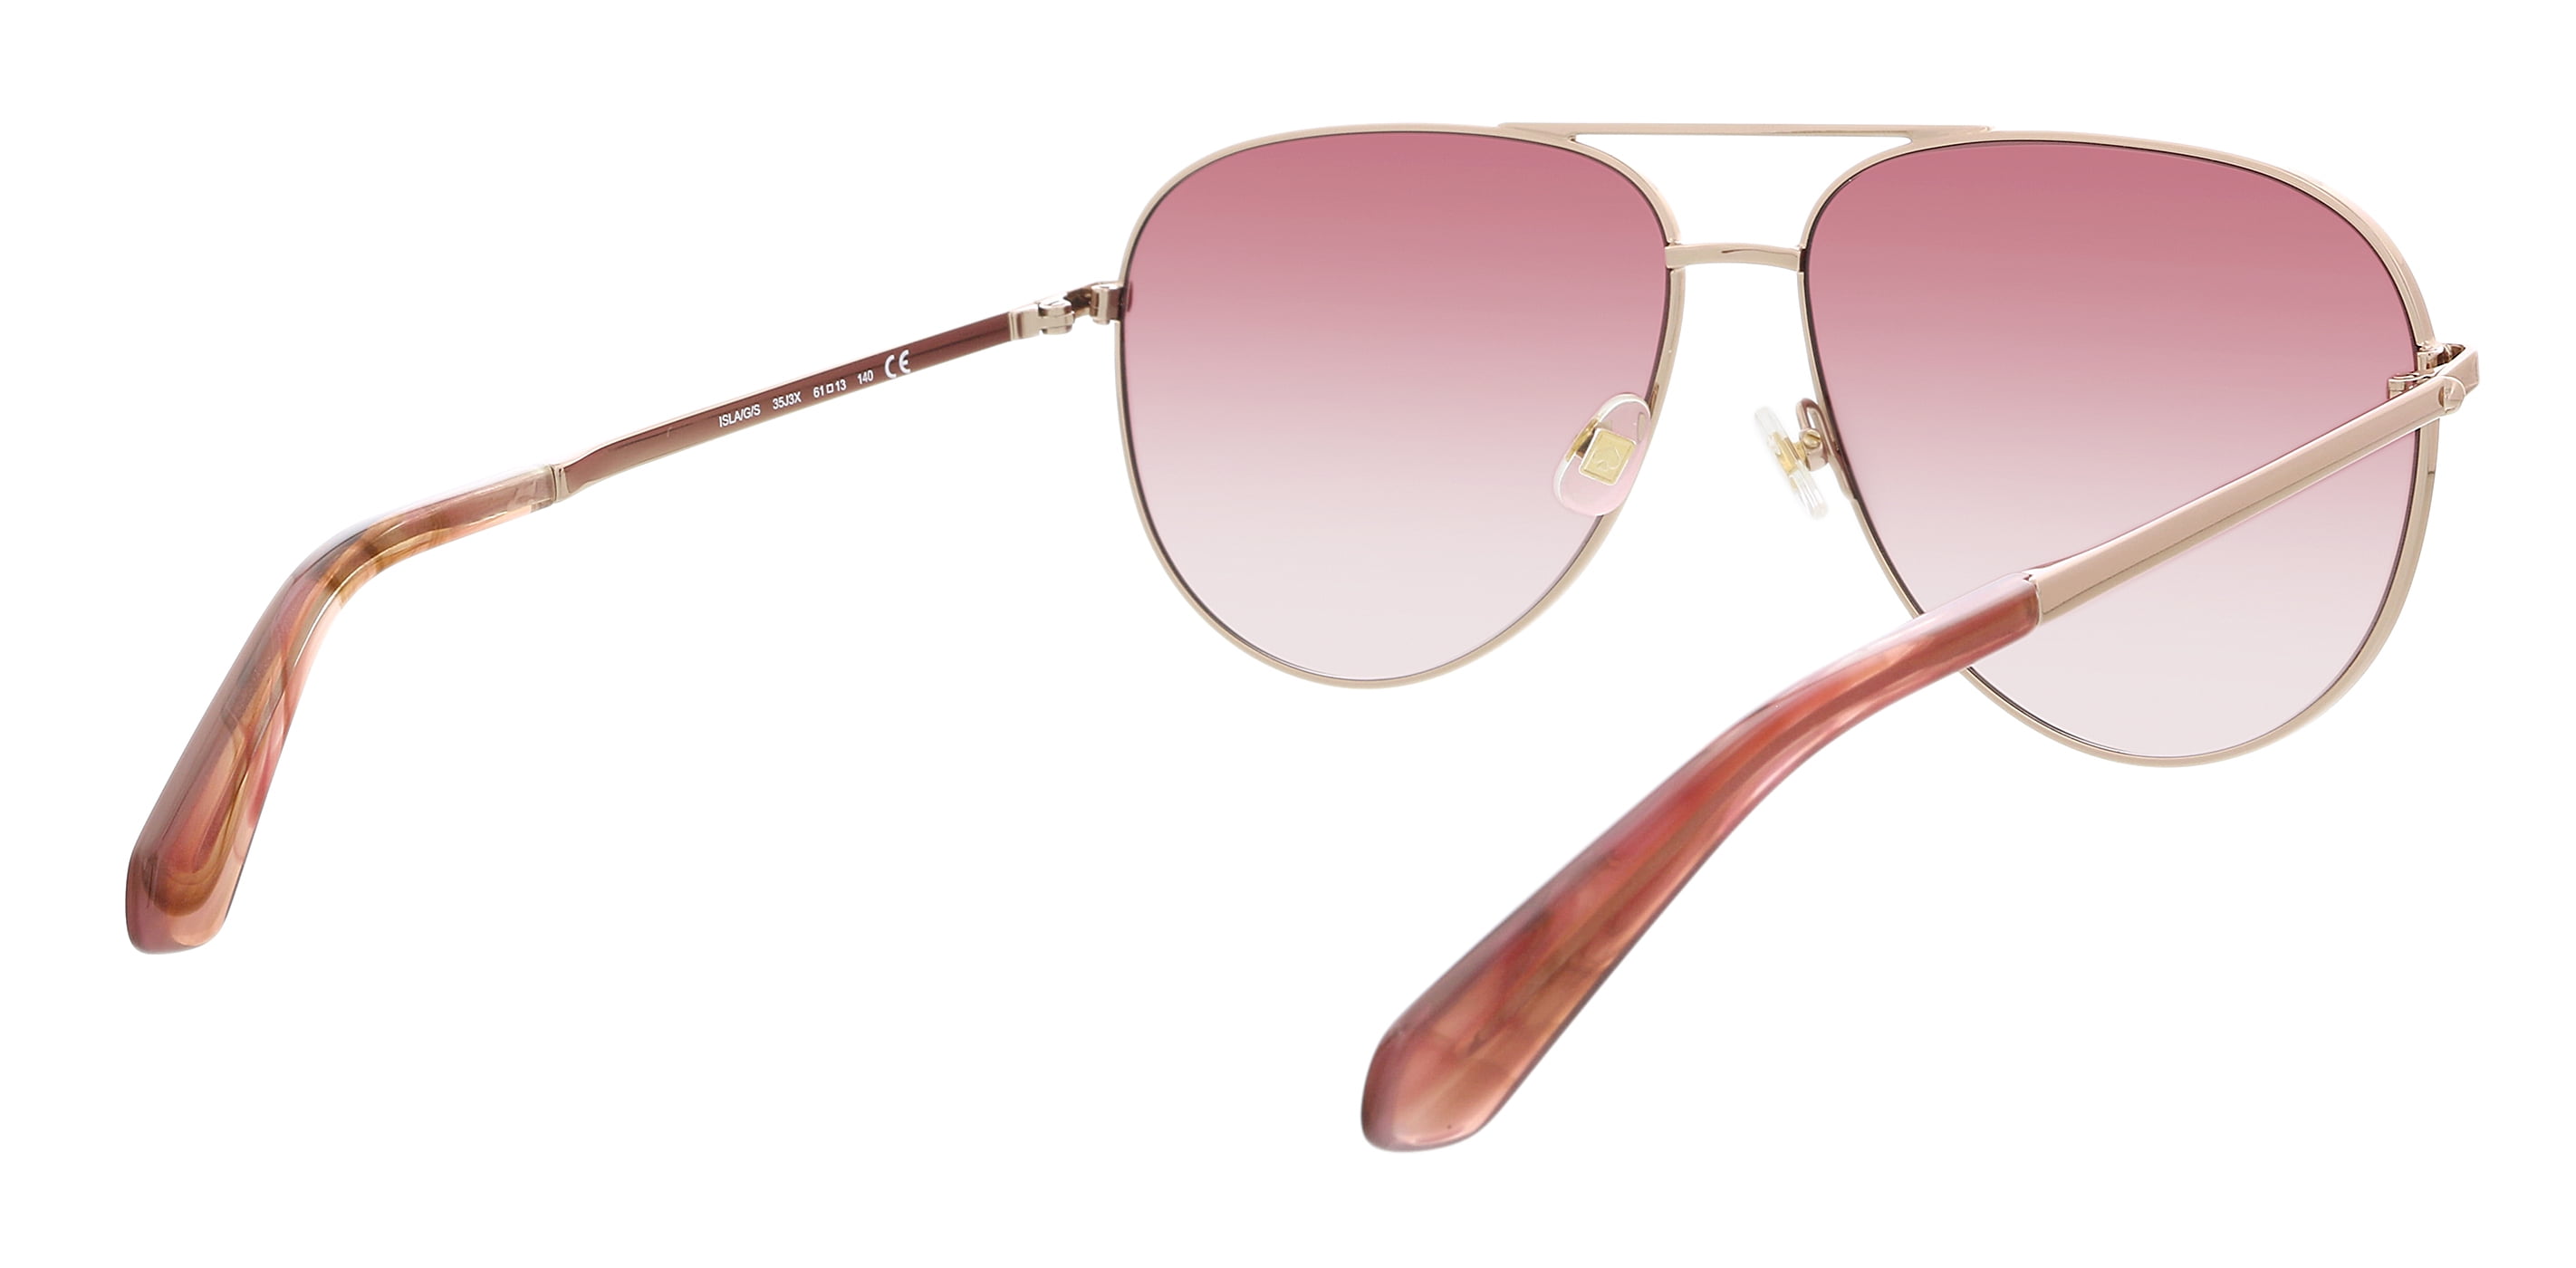 Buy KATE SPADE ISLAGS 035J 3X Gold Aviator Sunglasses for womens Online at  Lowest Price in Ubuy Algeria. 463857998